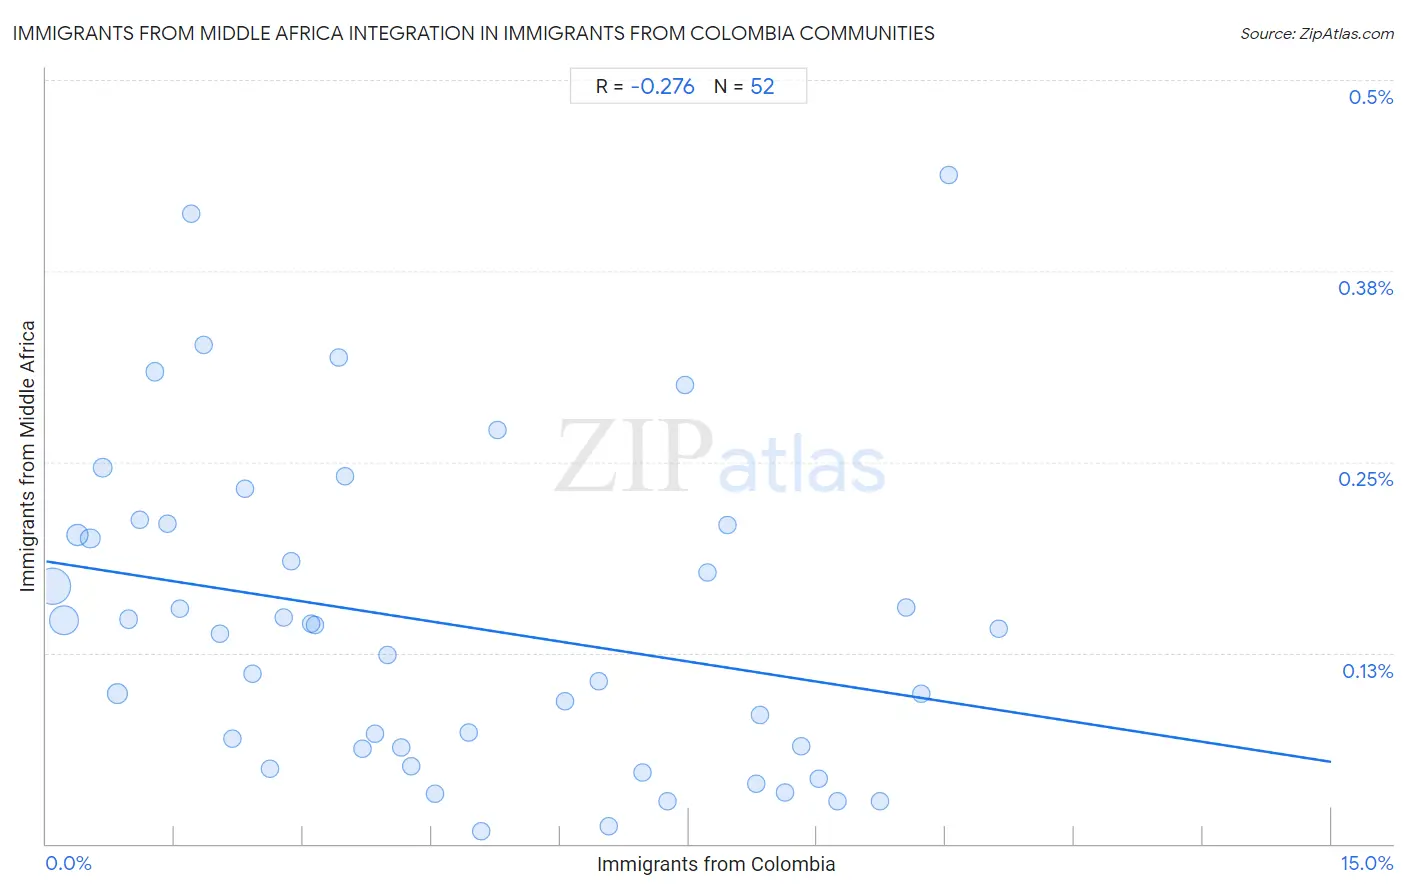 Immigrants from Colombia Integration in Immigrants from Middle Africa Communities